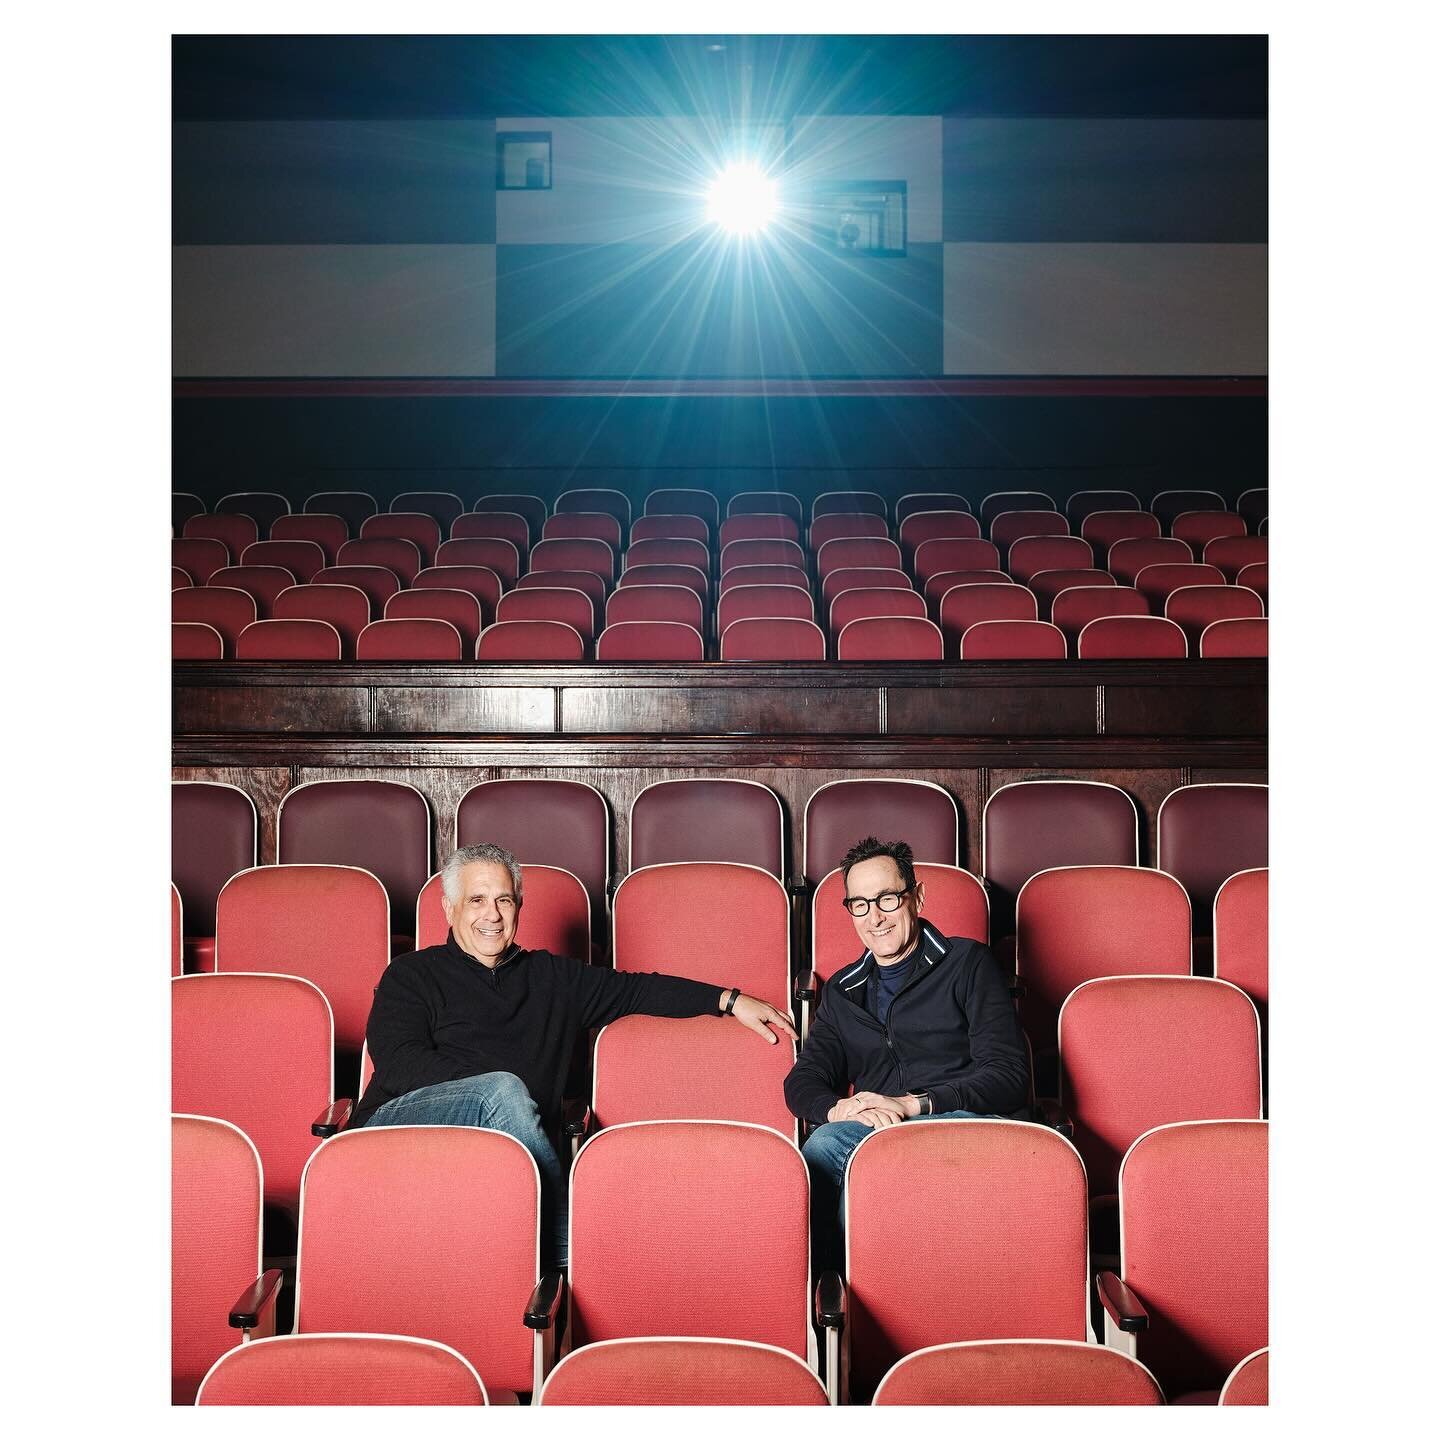 This latest edition of the Times Review Business Magazine showcases the individuals behind the creation of the new North Fork Arts Center. I am thrilled to witness the revitalization of this historic theatre. The @northfork.artscenter is set to be a 